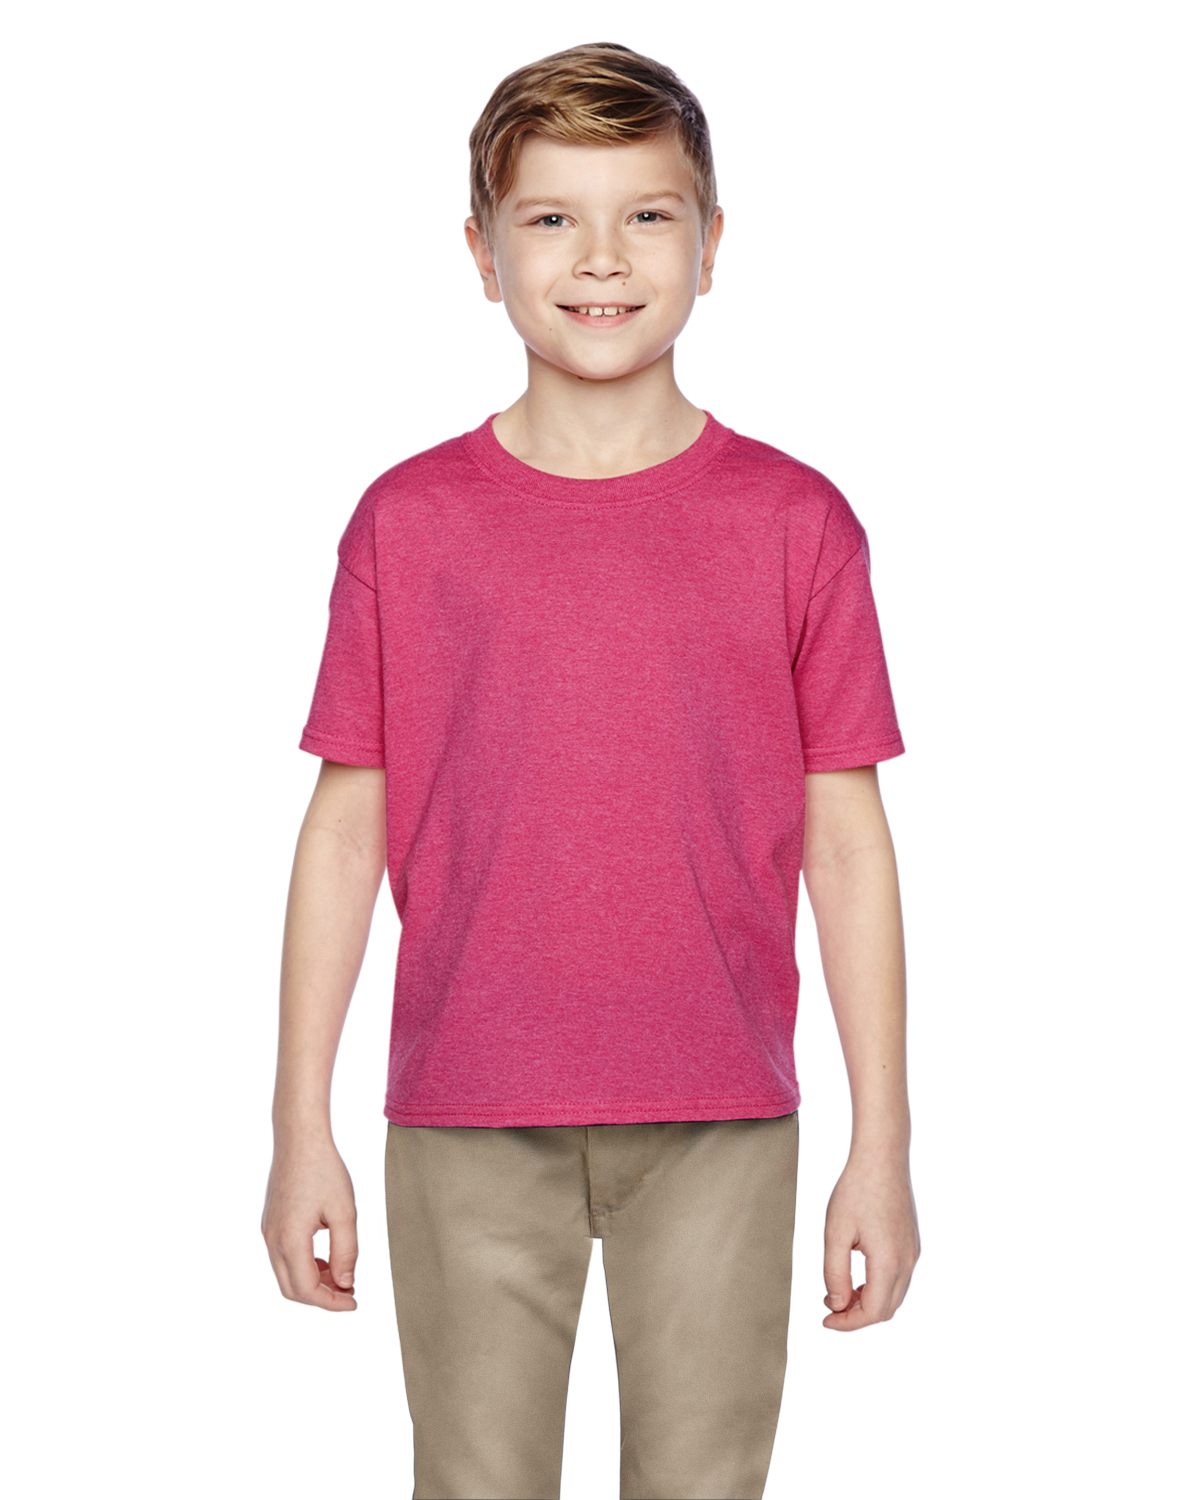 Kids Plain T-Shirt - Fruit of the Loom Original Children's Tee - FREE  DELIVERY